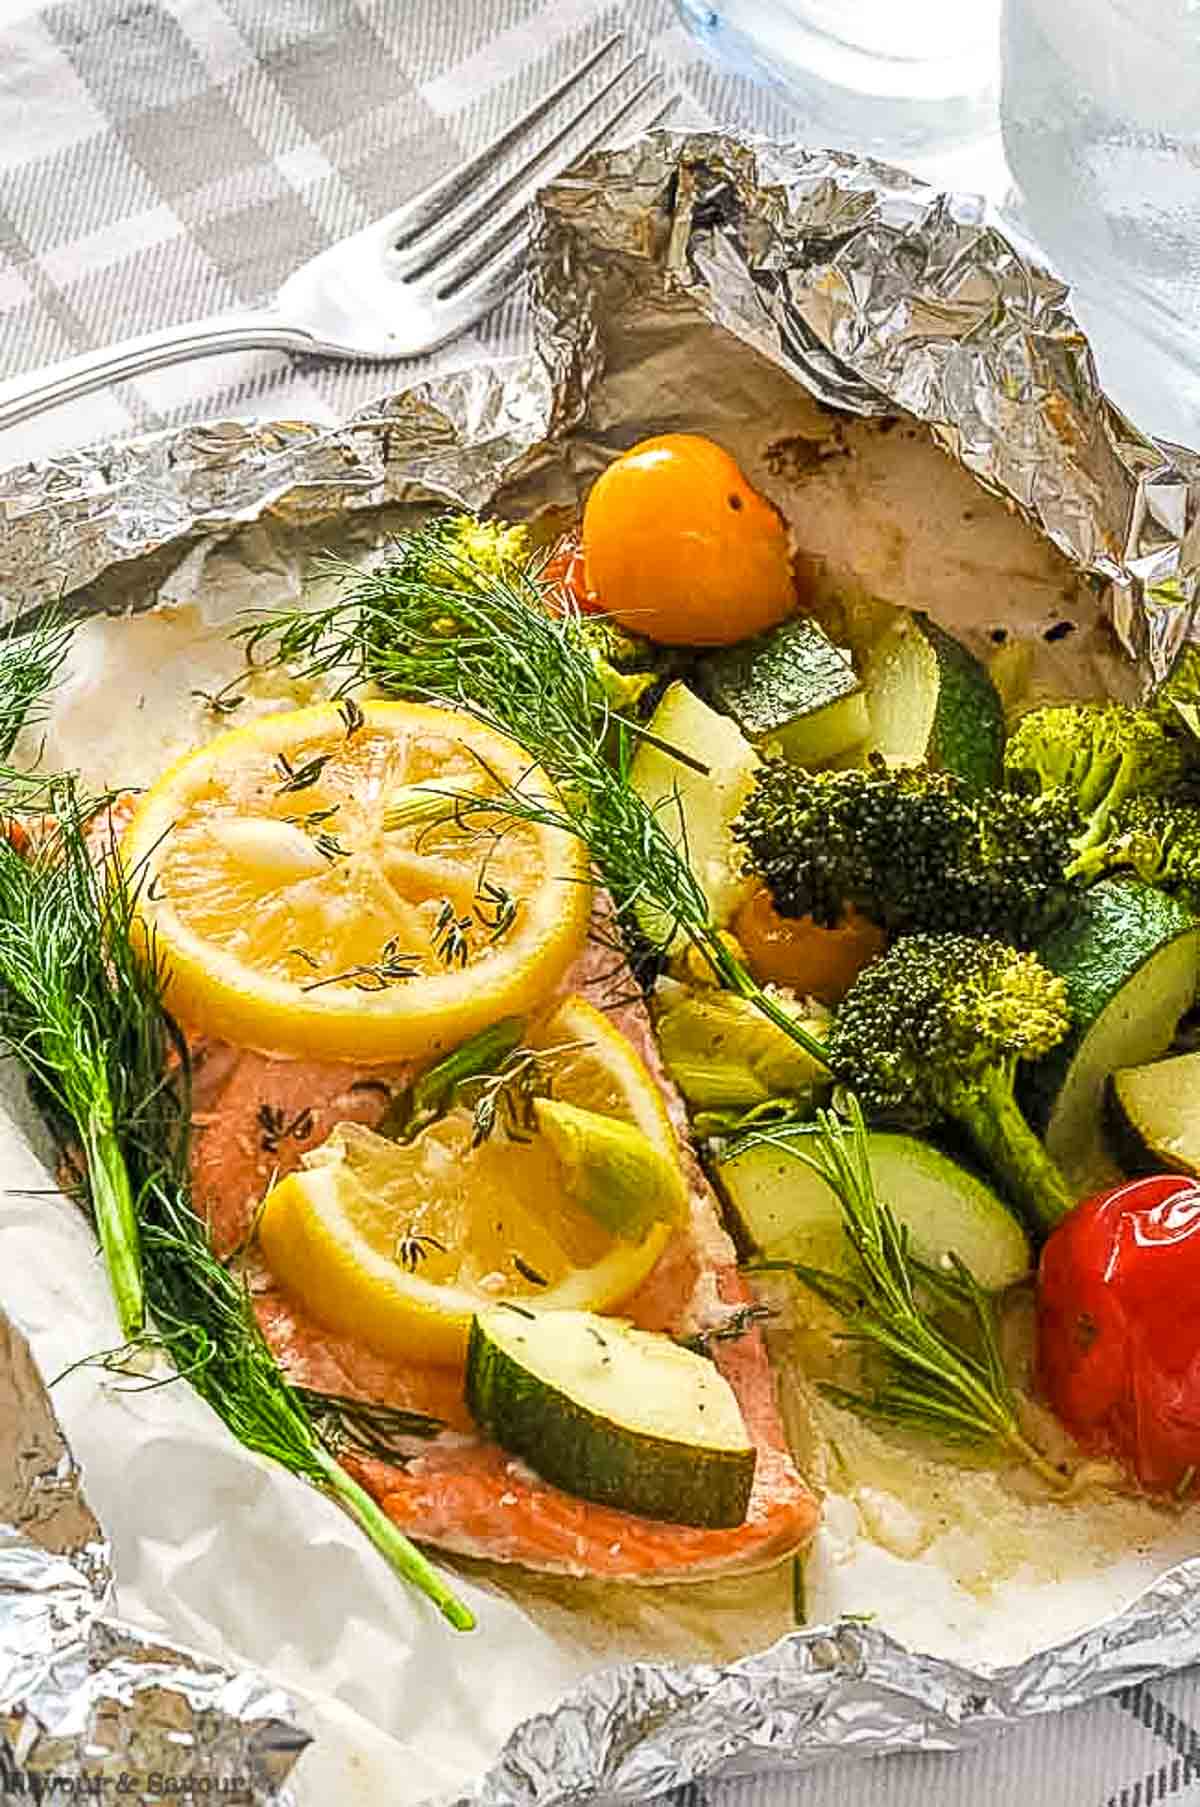 Close up view of a salmon fillet and vegetables in an opened foil packet.